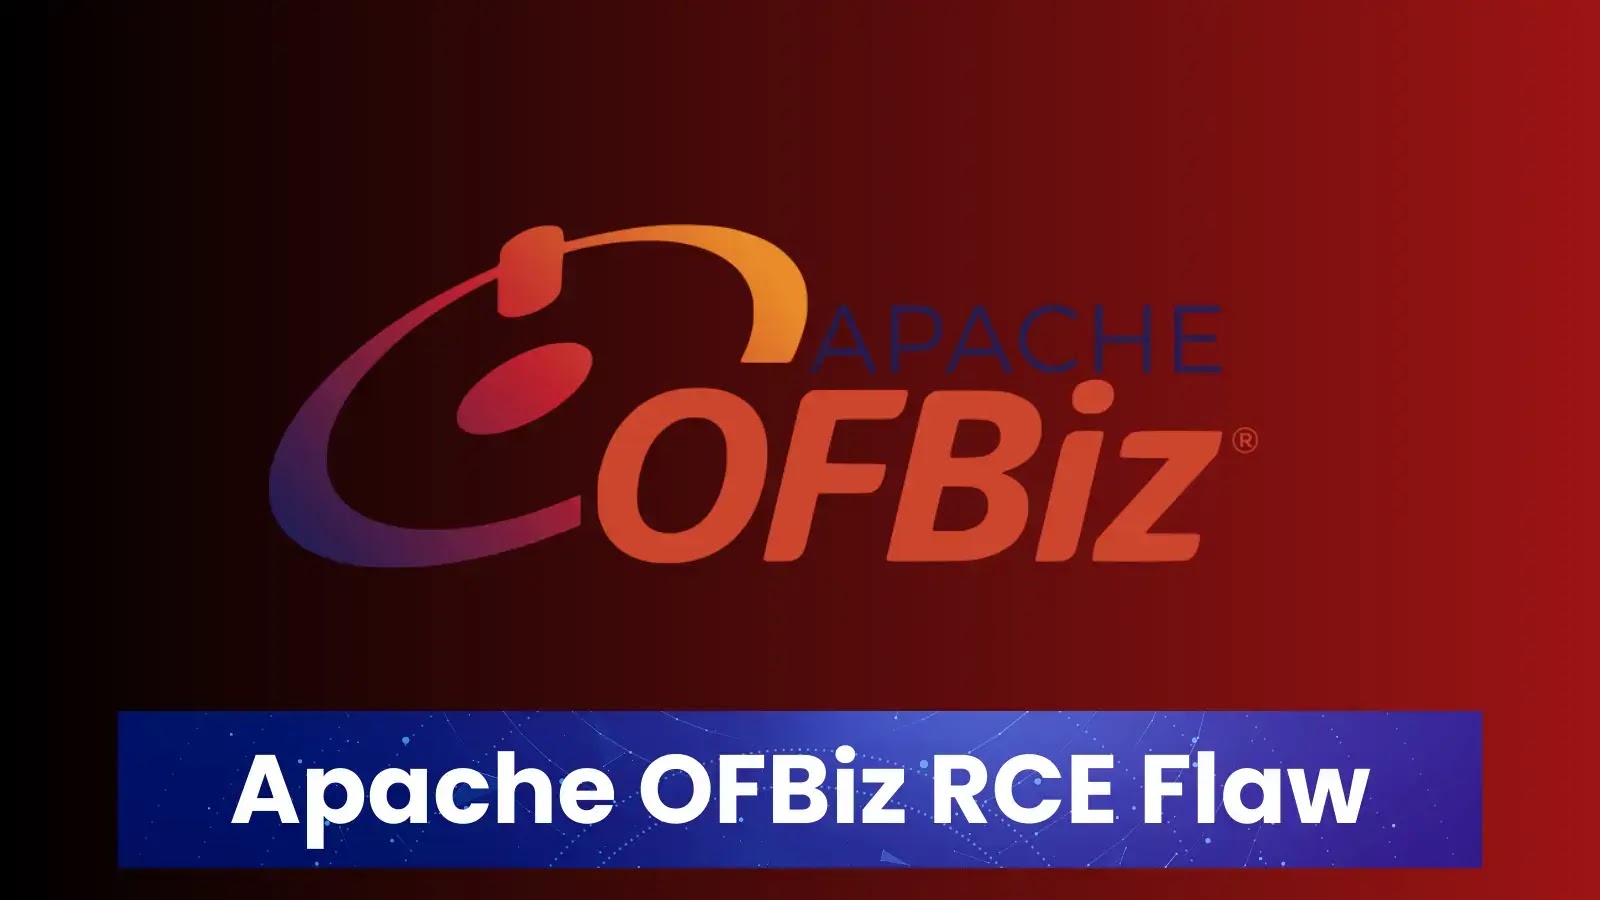 Apache OFBiz RCE Flaw Let Attackers Execute Malicious Code Remotely